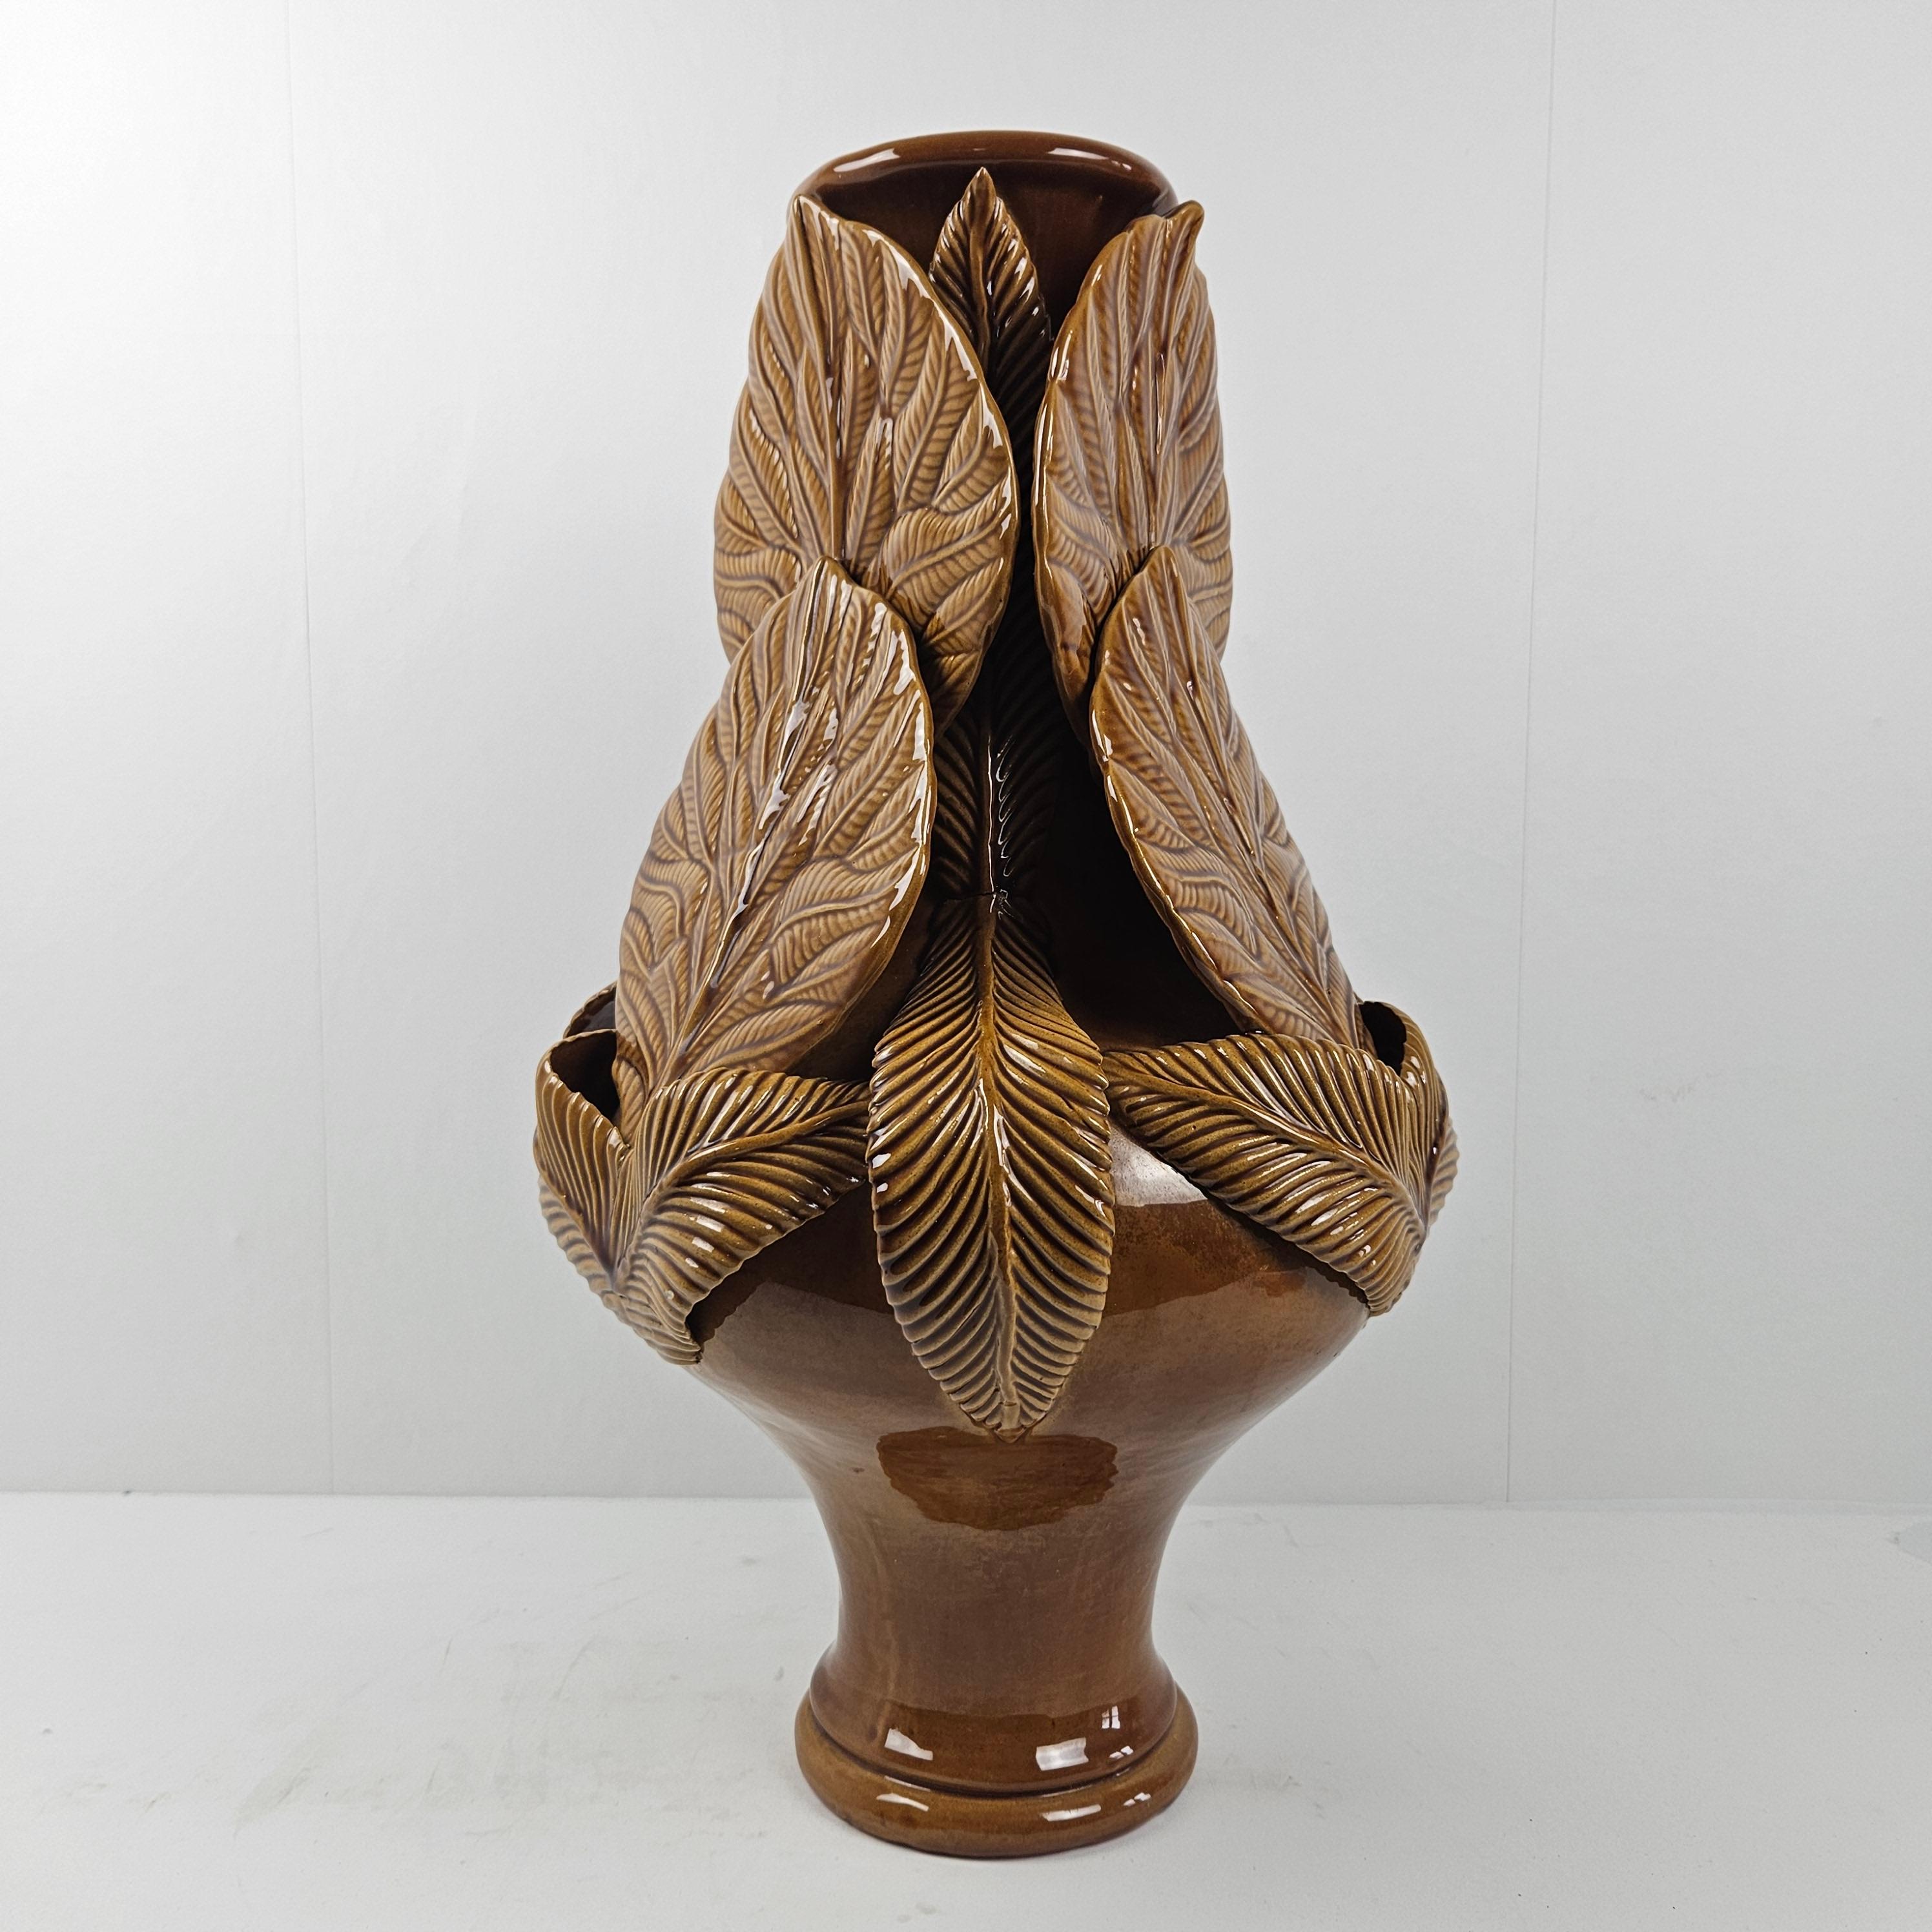 Amazing and large ceramic vase, fabricated in Italy in the 80's.

Beautiful design with different kind of leaves and a slender lower part.
Finished with a deep brown glazed finish with different tone.

We have never seen this vase or something